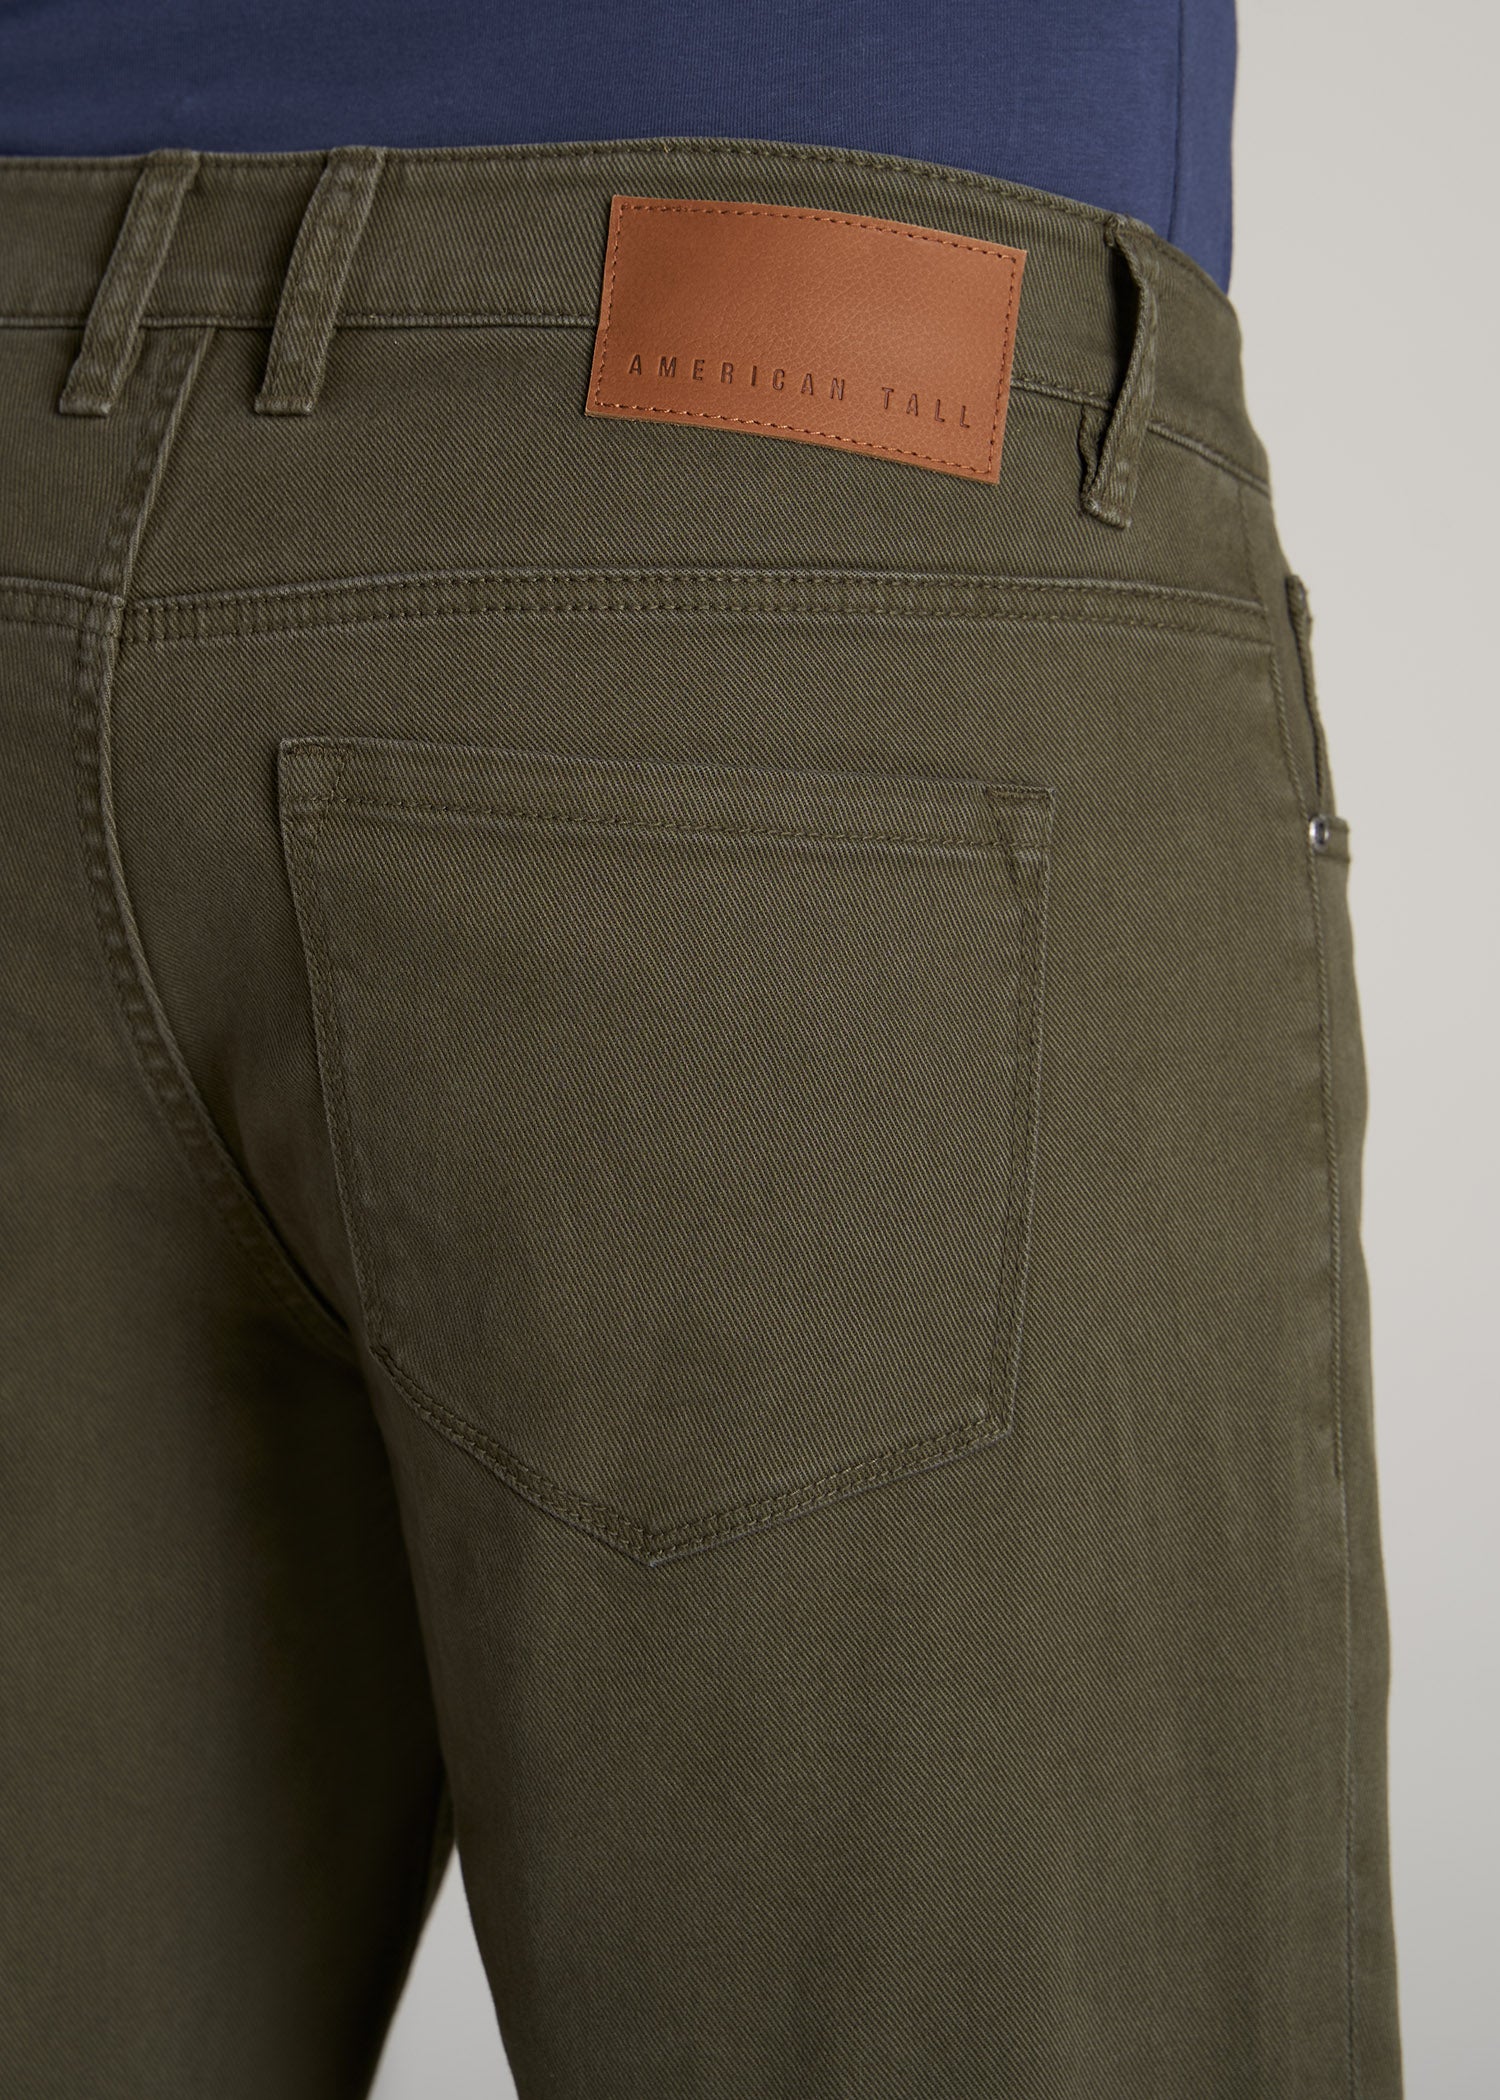    American-Tall-Men-Carman-Tapered-Fit-Jeans-Olive-Green-Wash-detail